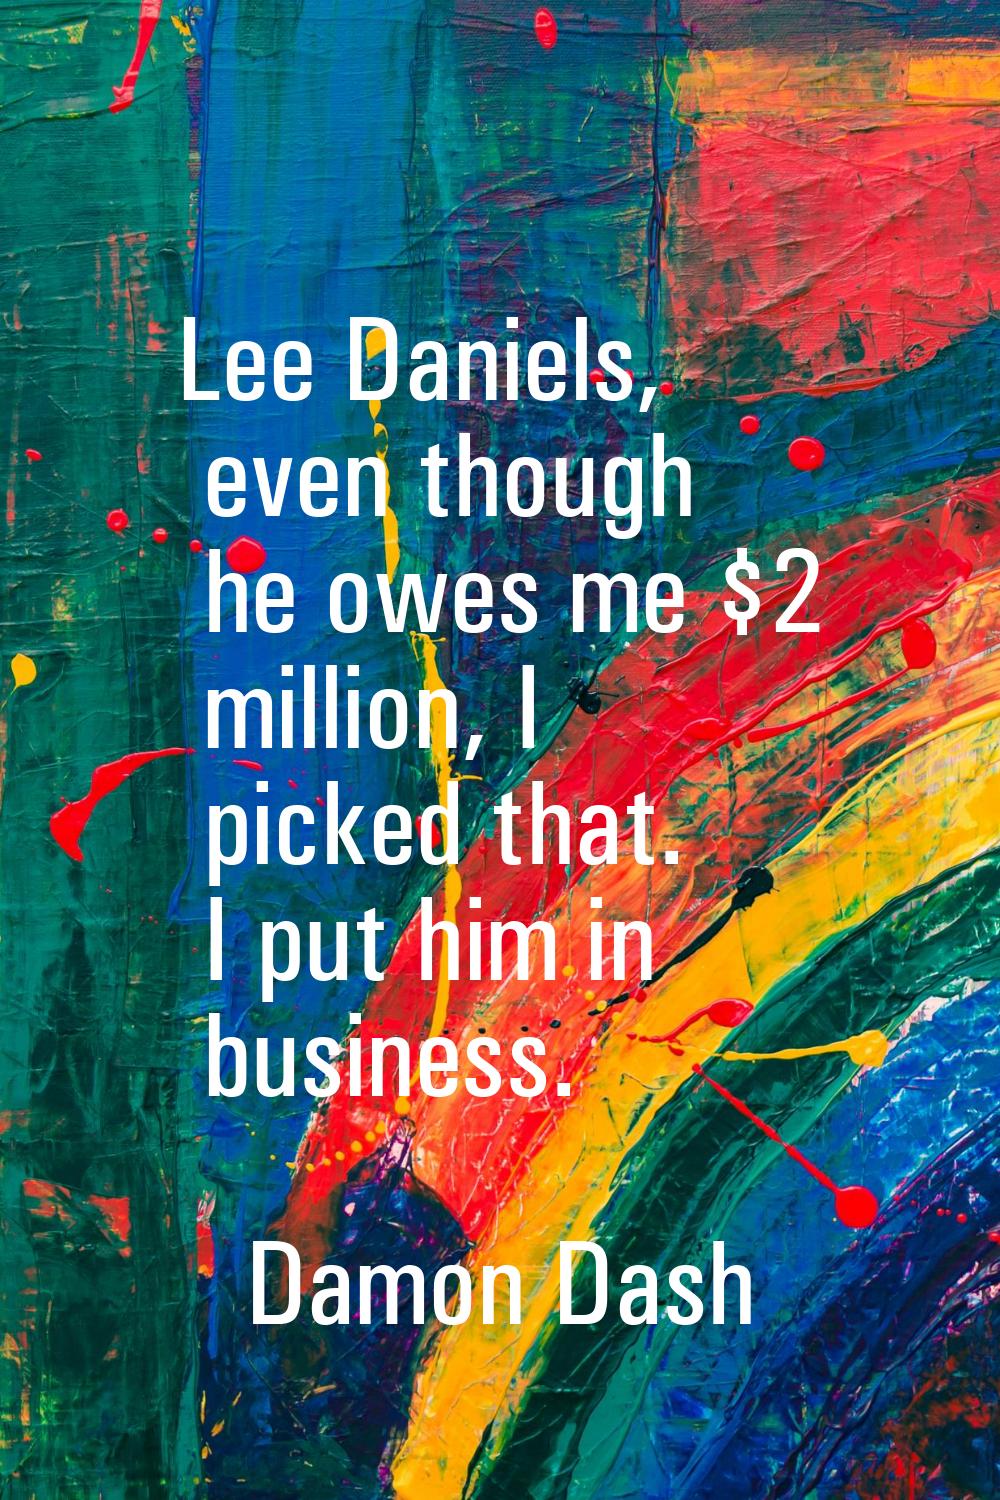 Lee Daniels, even though he owes me $2 million, I picked that. I put him in business.